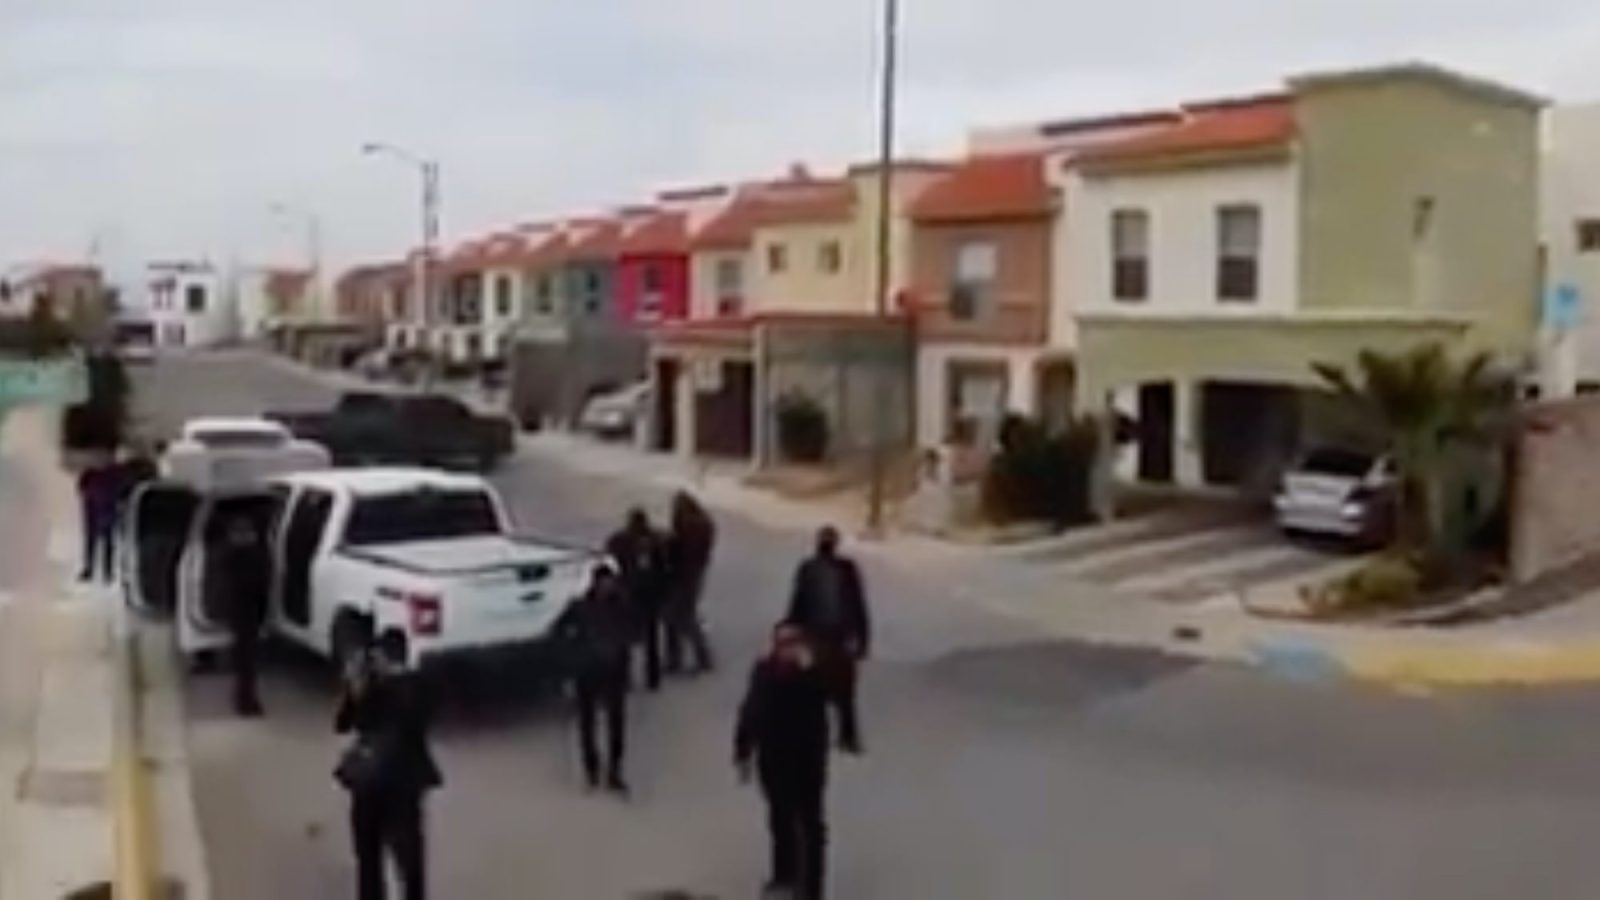 Police shoot reporter's drone out of the sky in Mexico